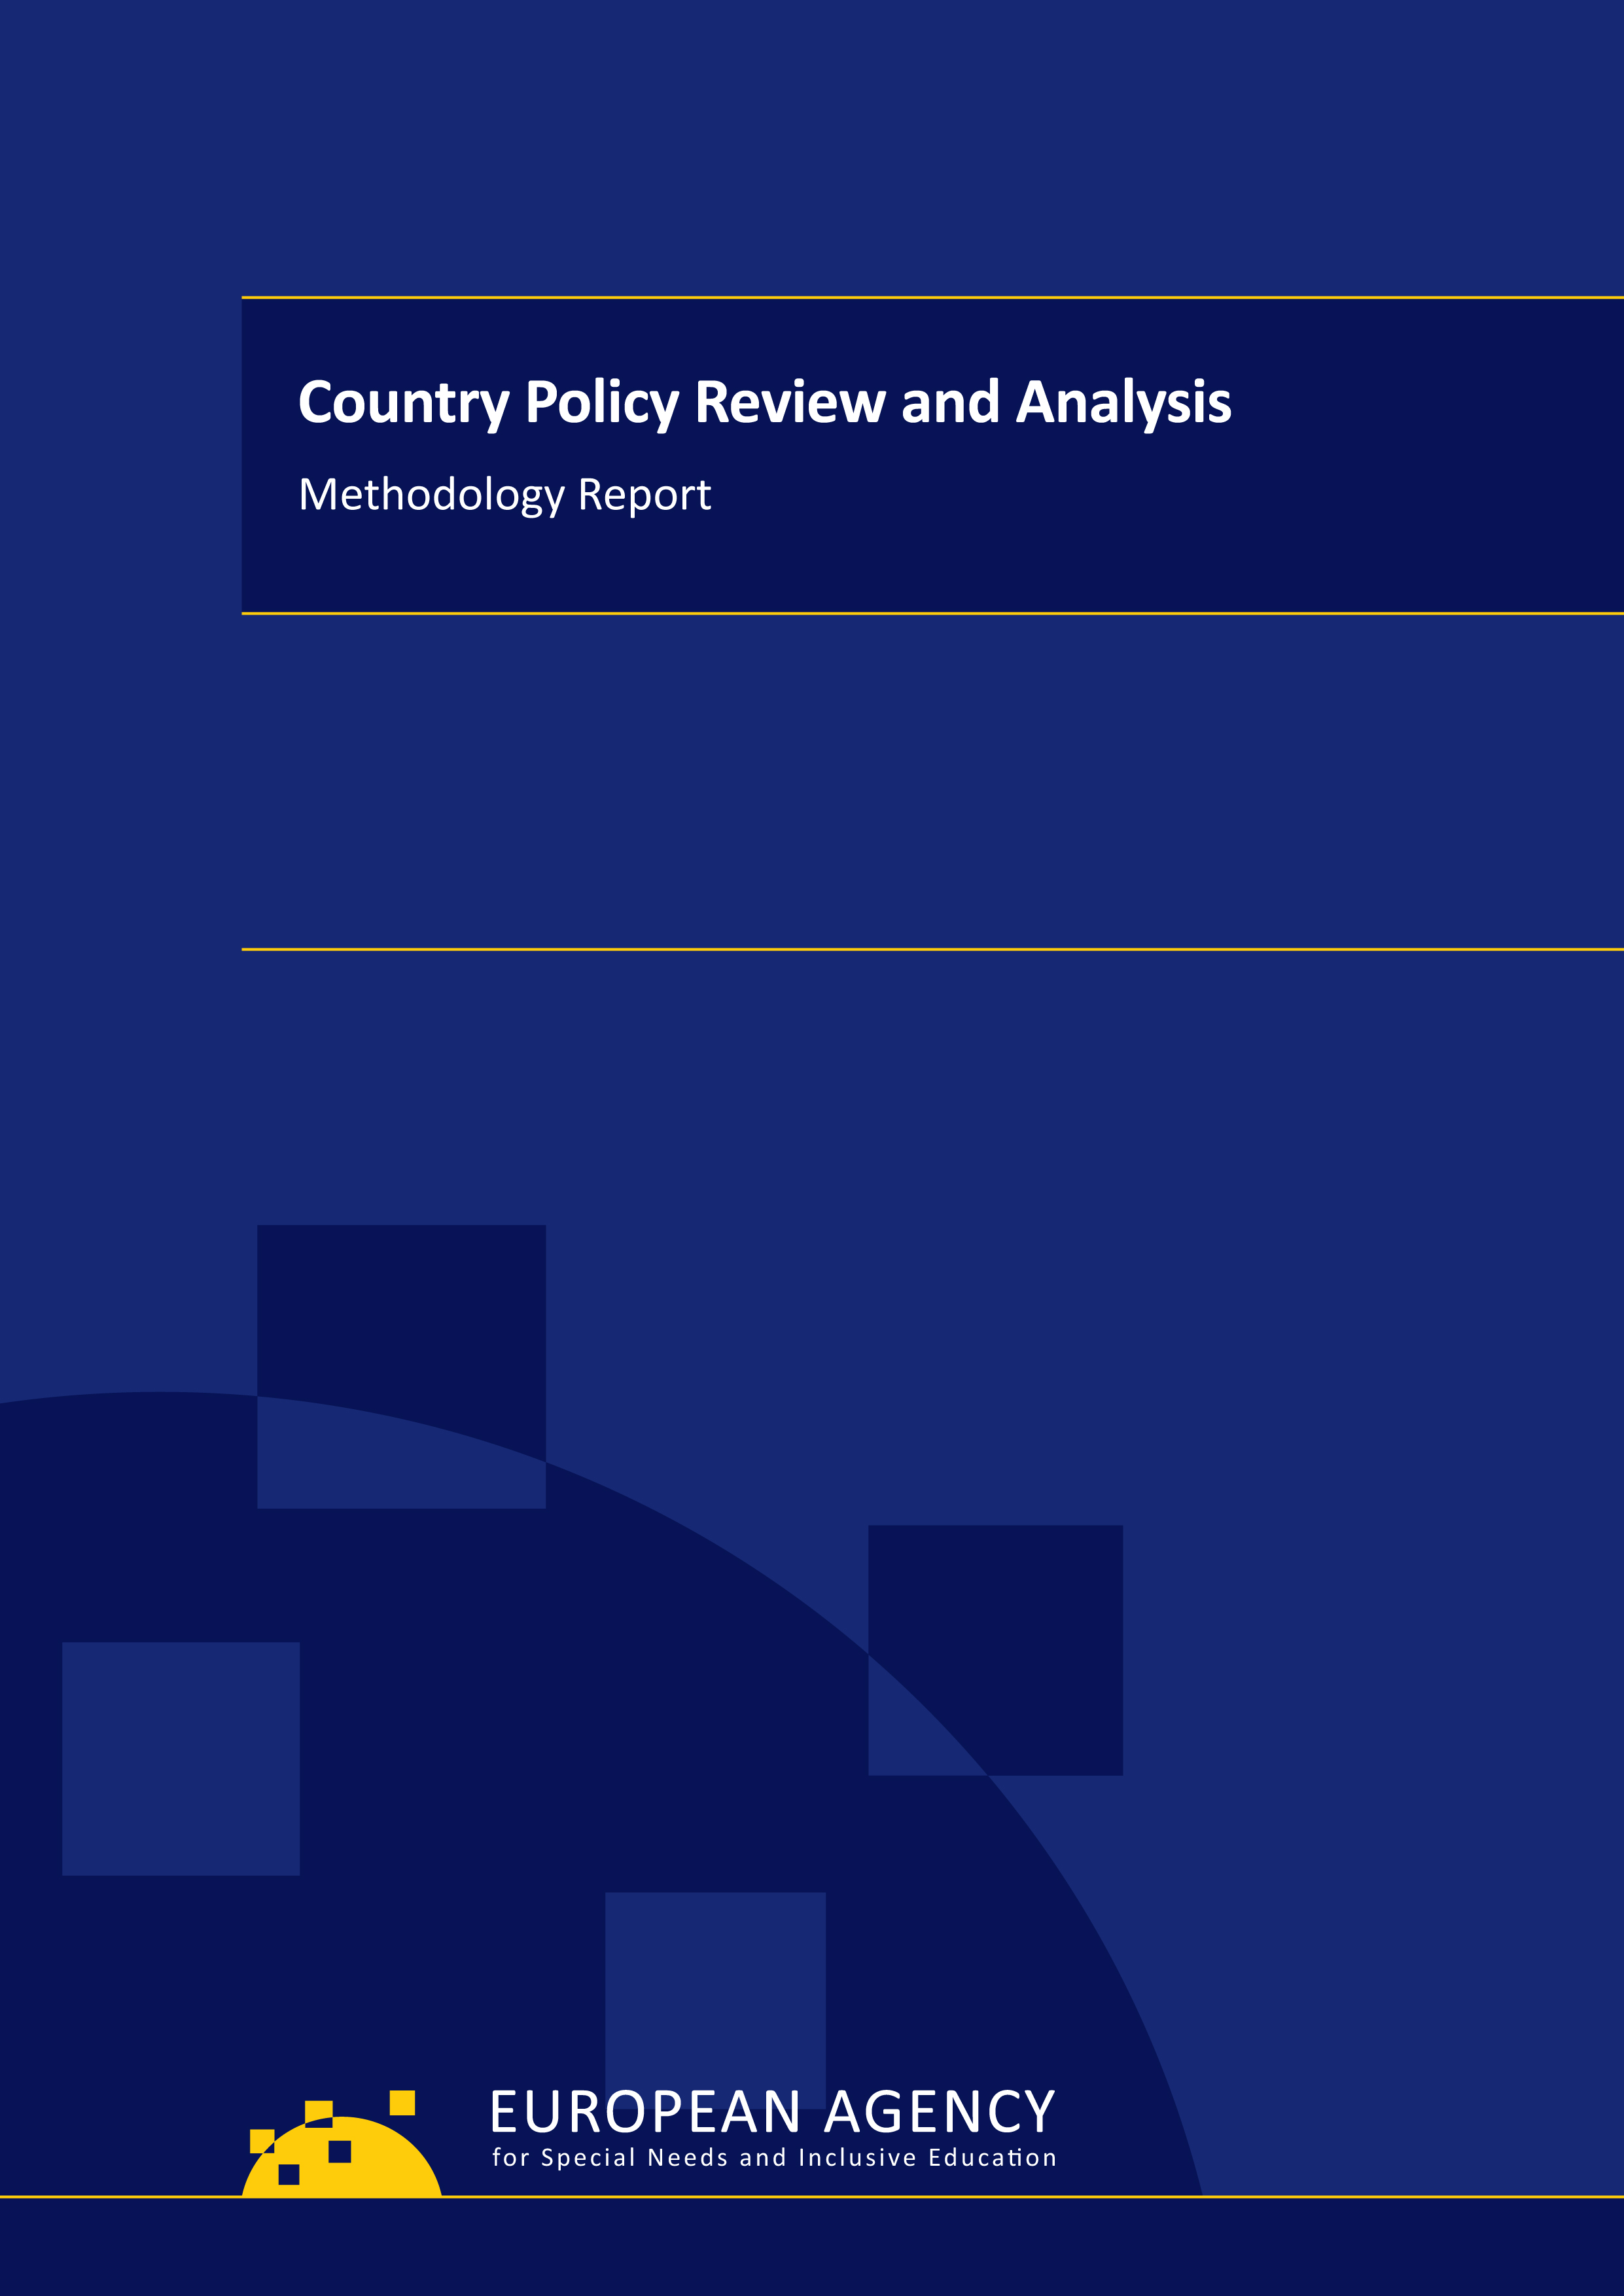 Country Policy Review and Analysis – Methodology Report